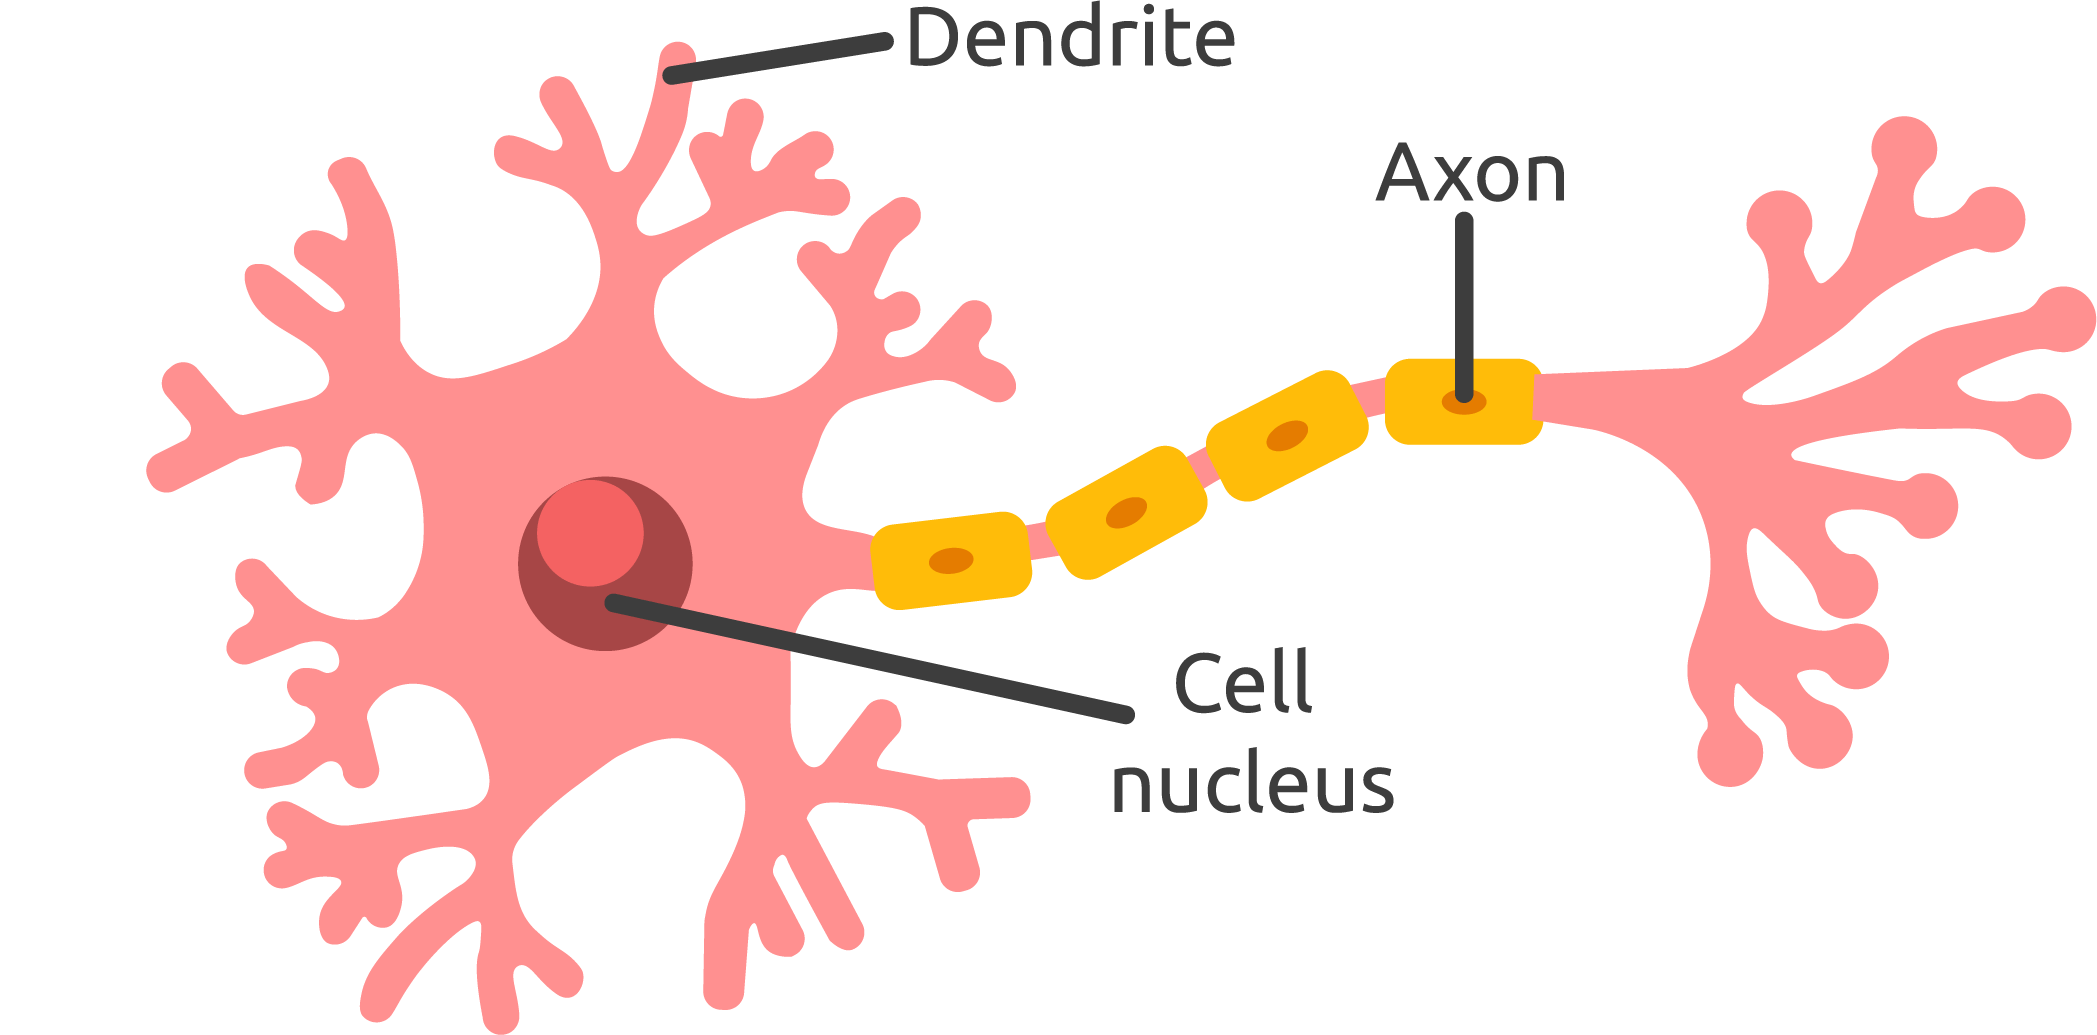 <p>tubelike structure of a neurons that carries the neural message from the cell body to the axon terminals, for communication with other cells</p>